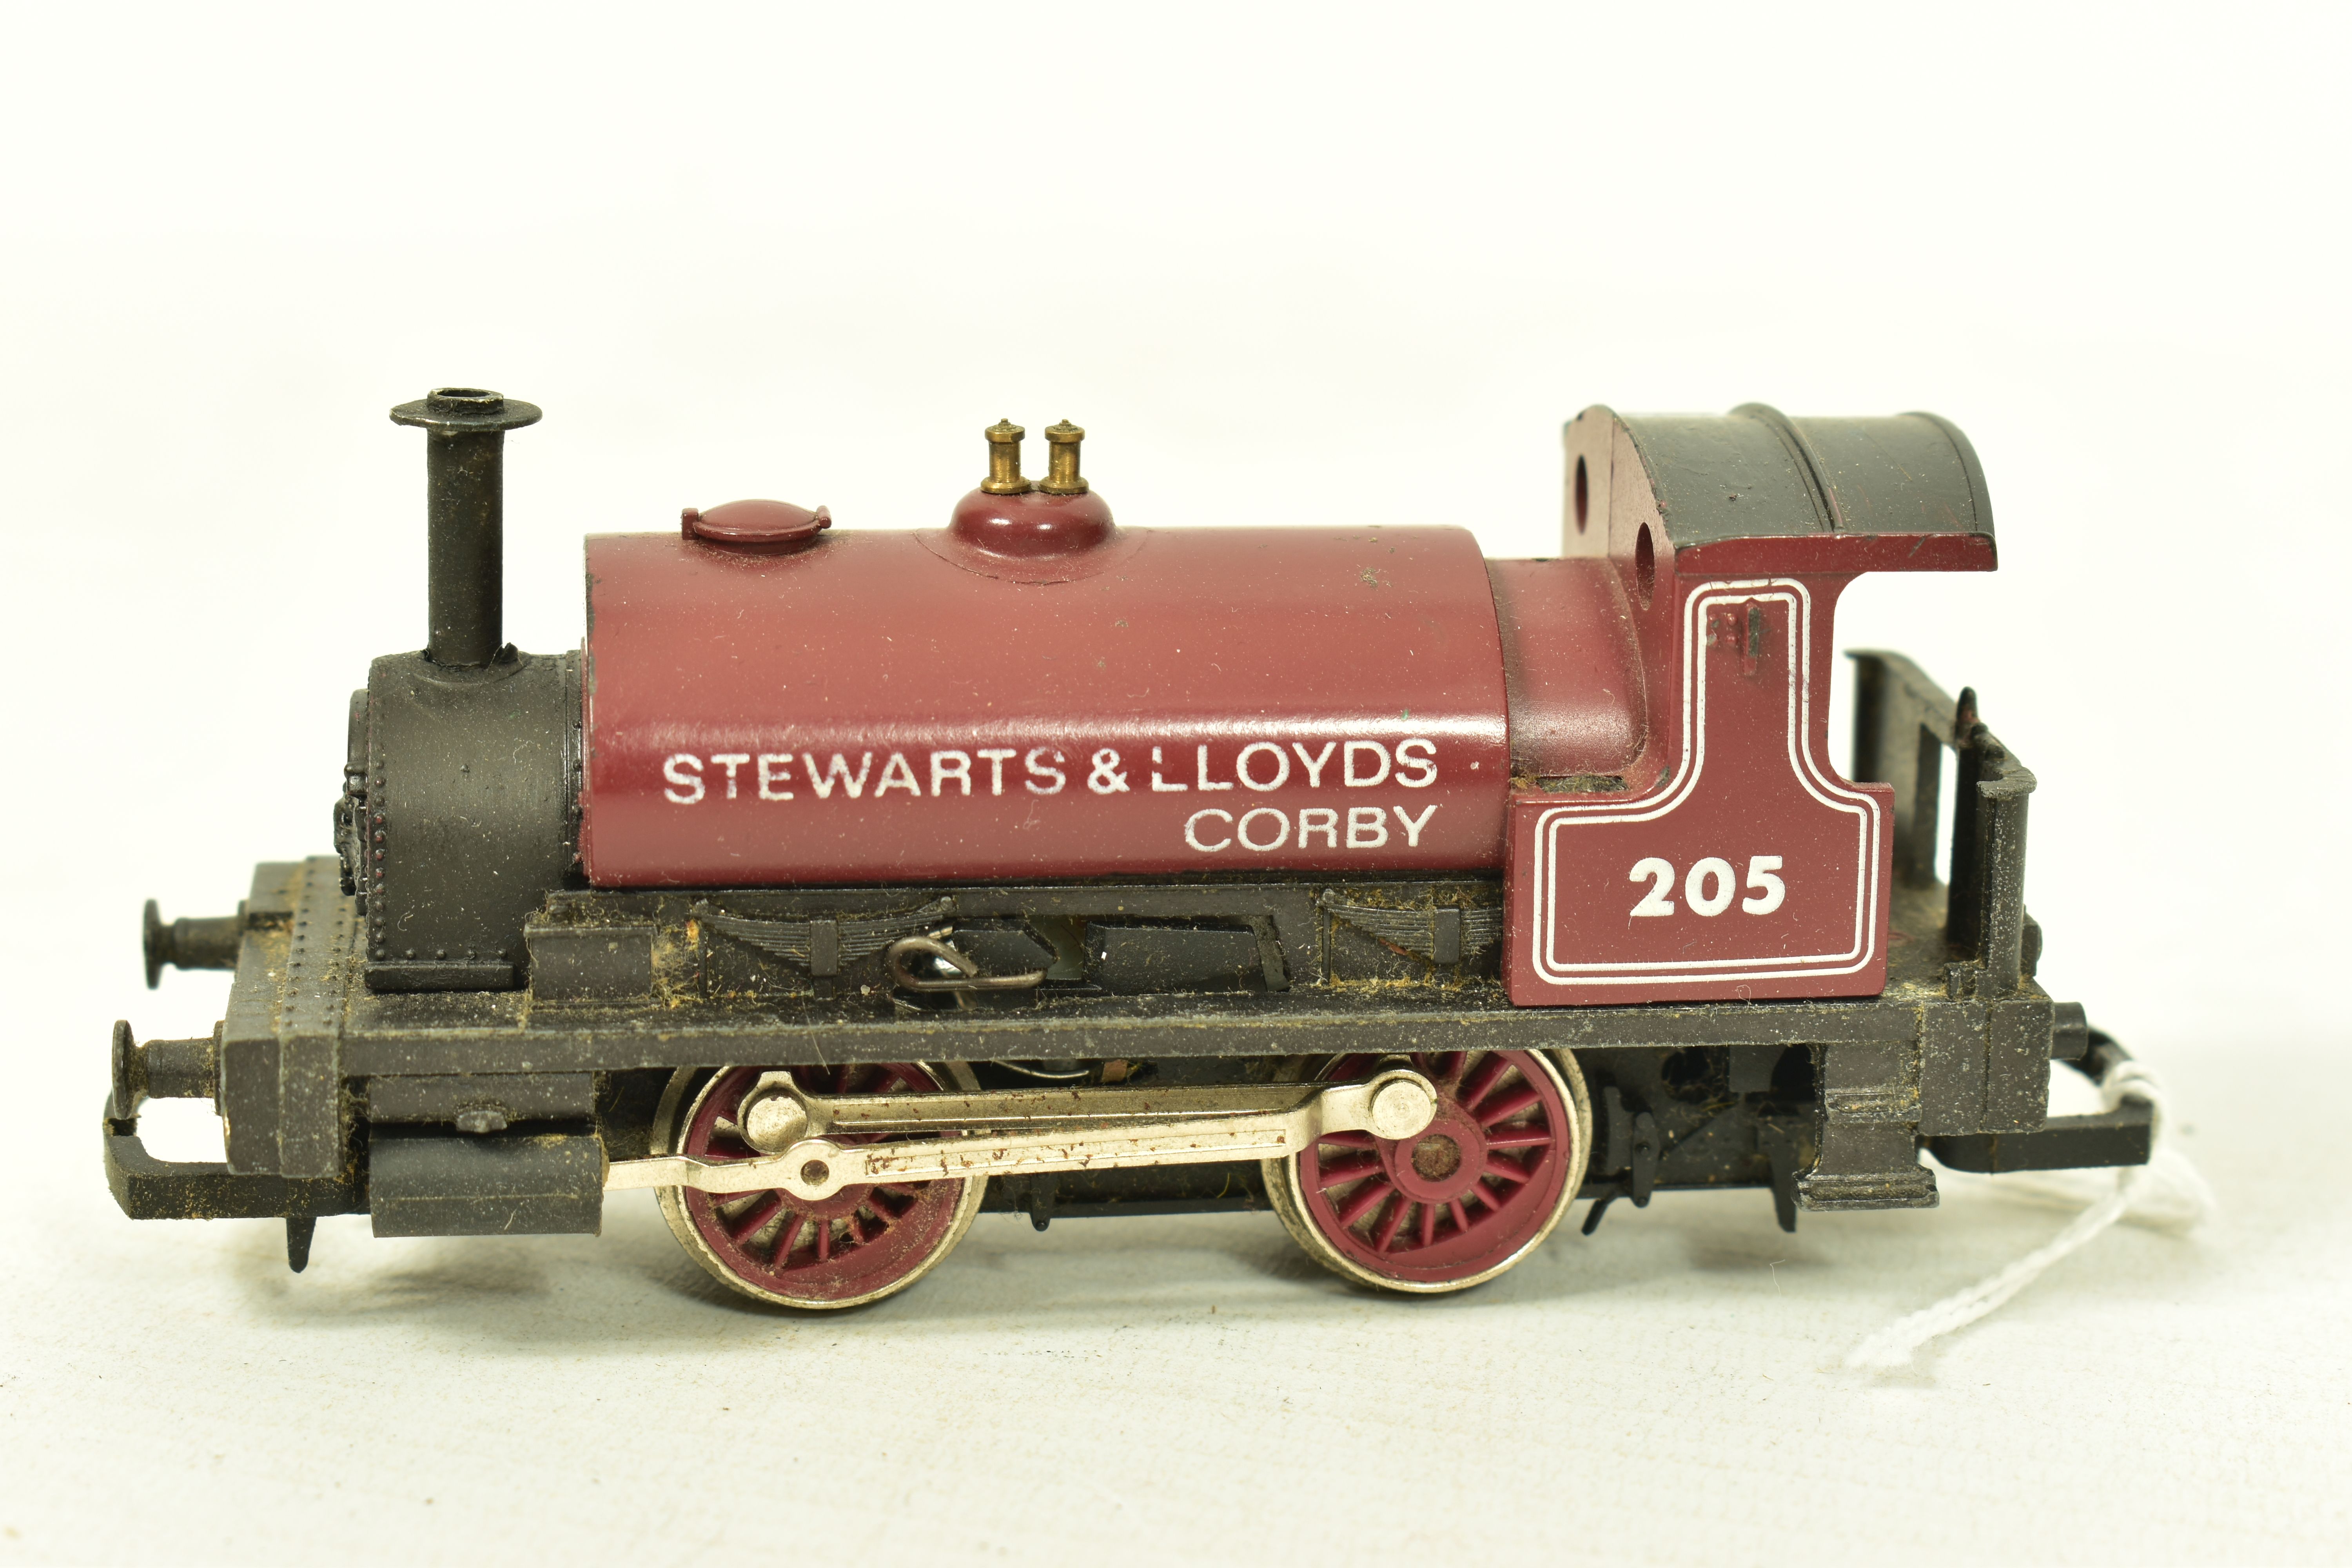 SIX BOXED HORNBY OO GAUGE CLASS 0F PUG SADDLE TANK LOCOMOTIVES, assorted numbers and liveries (R752, - Image 3 of 7